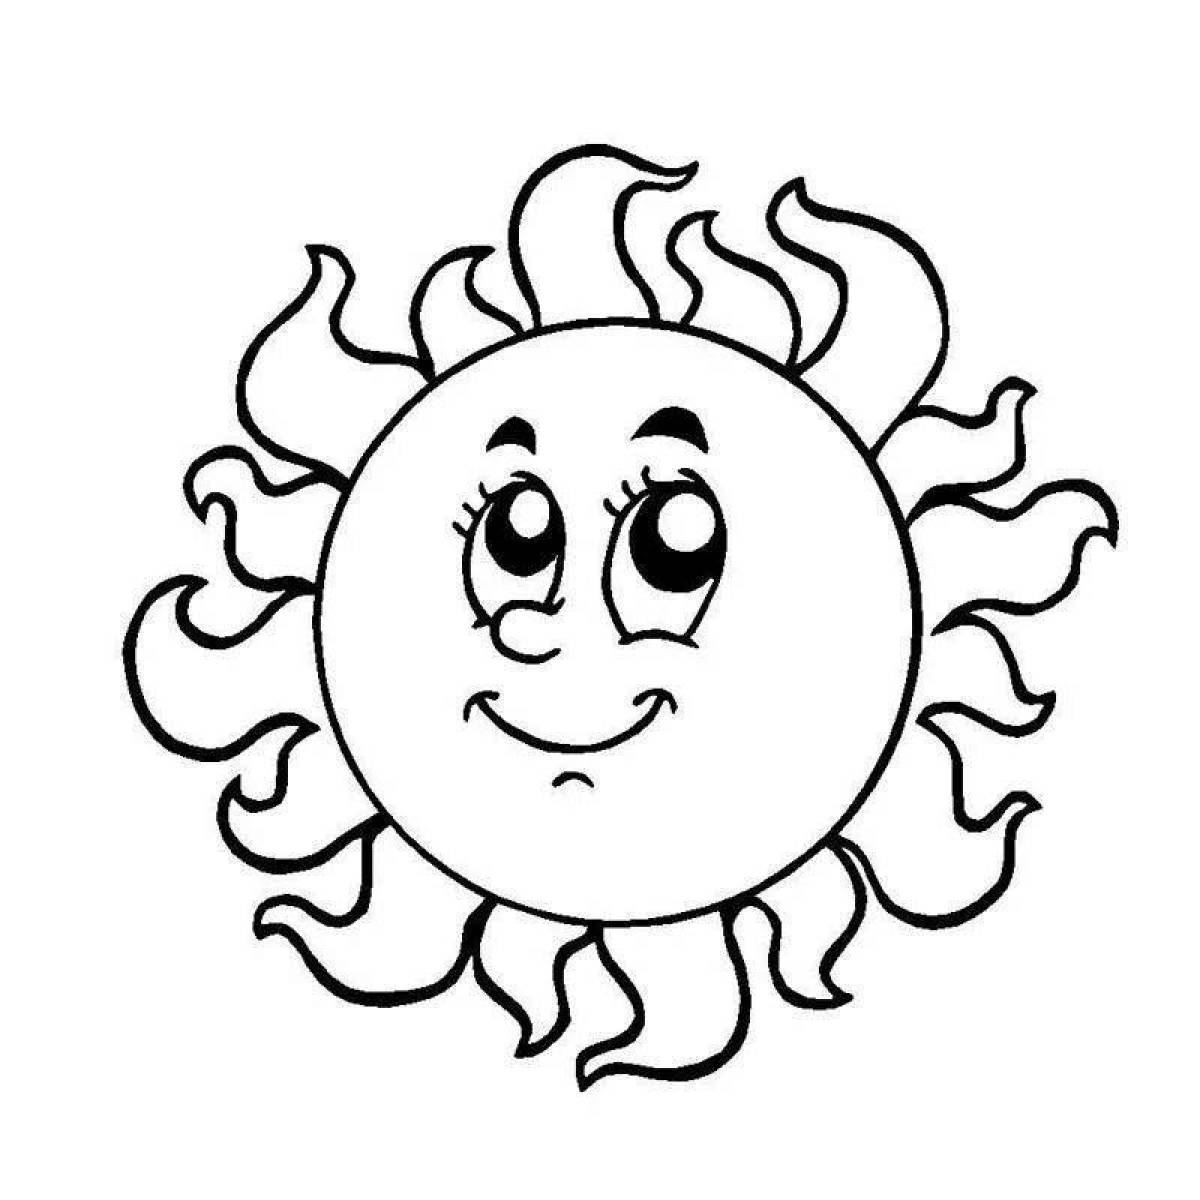 Major coloring picture of the sun